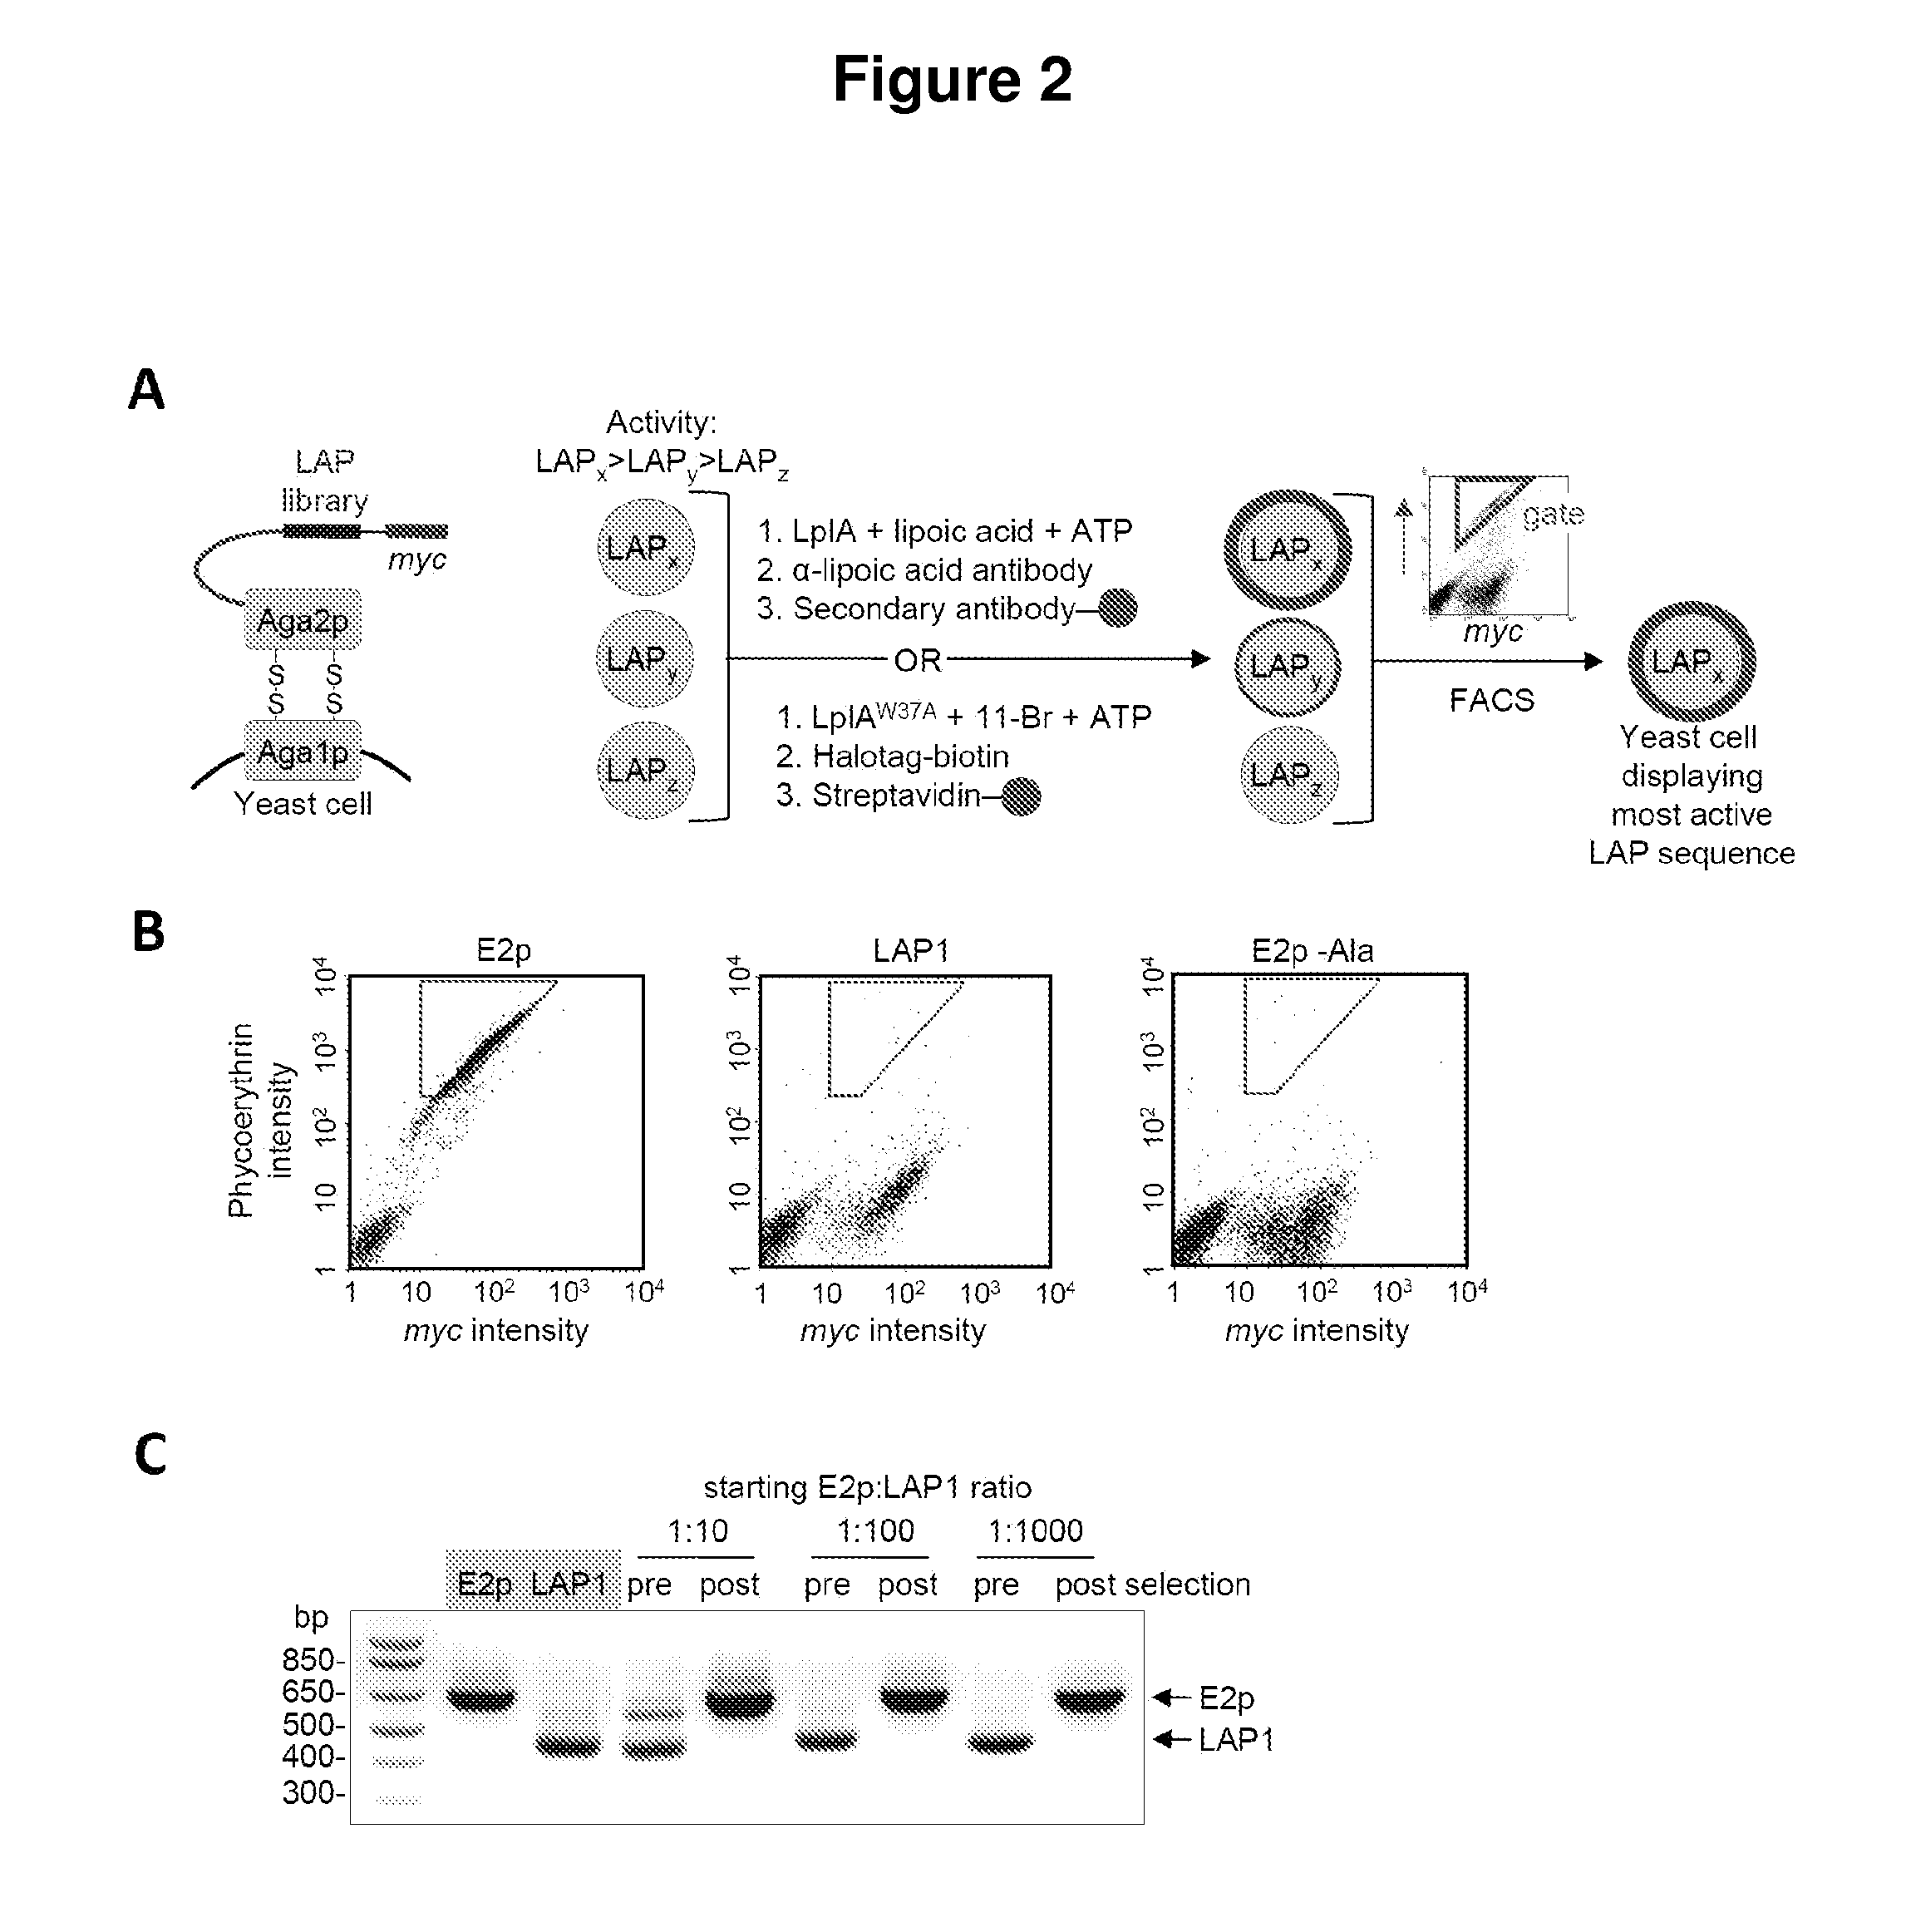 Kinetically efficient substrate for lipoic acid ligase